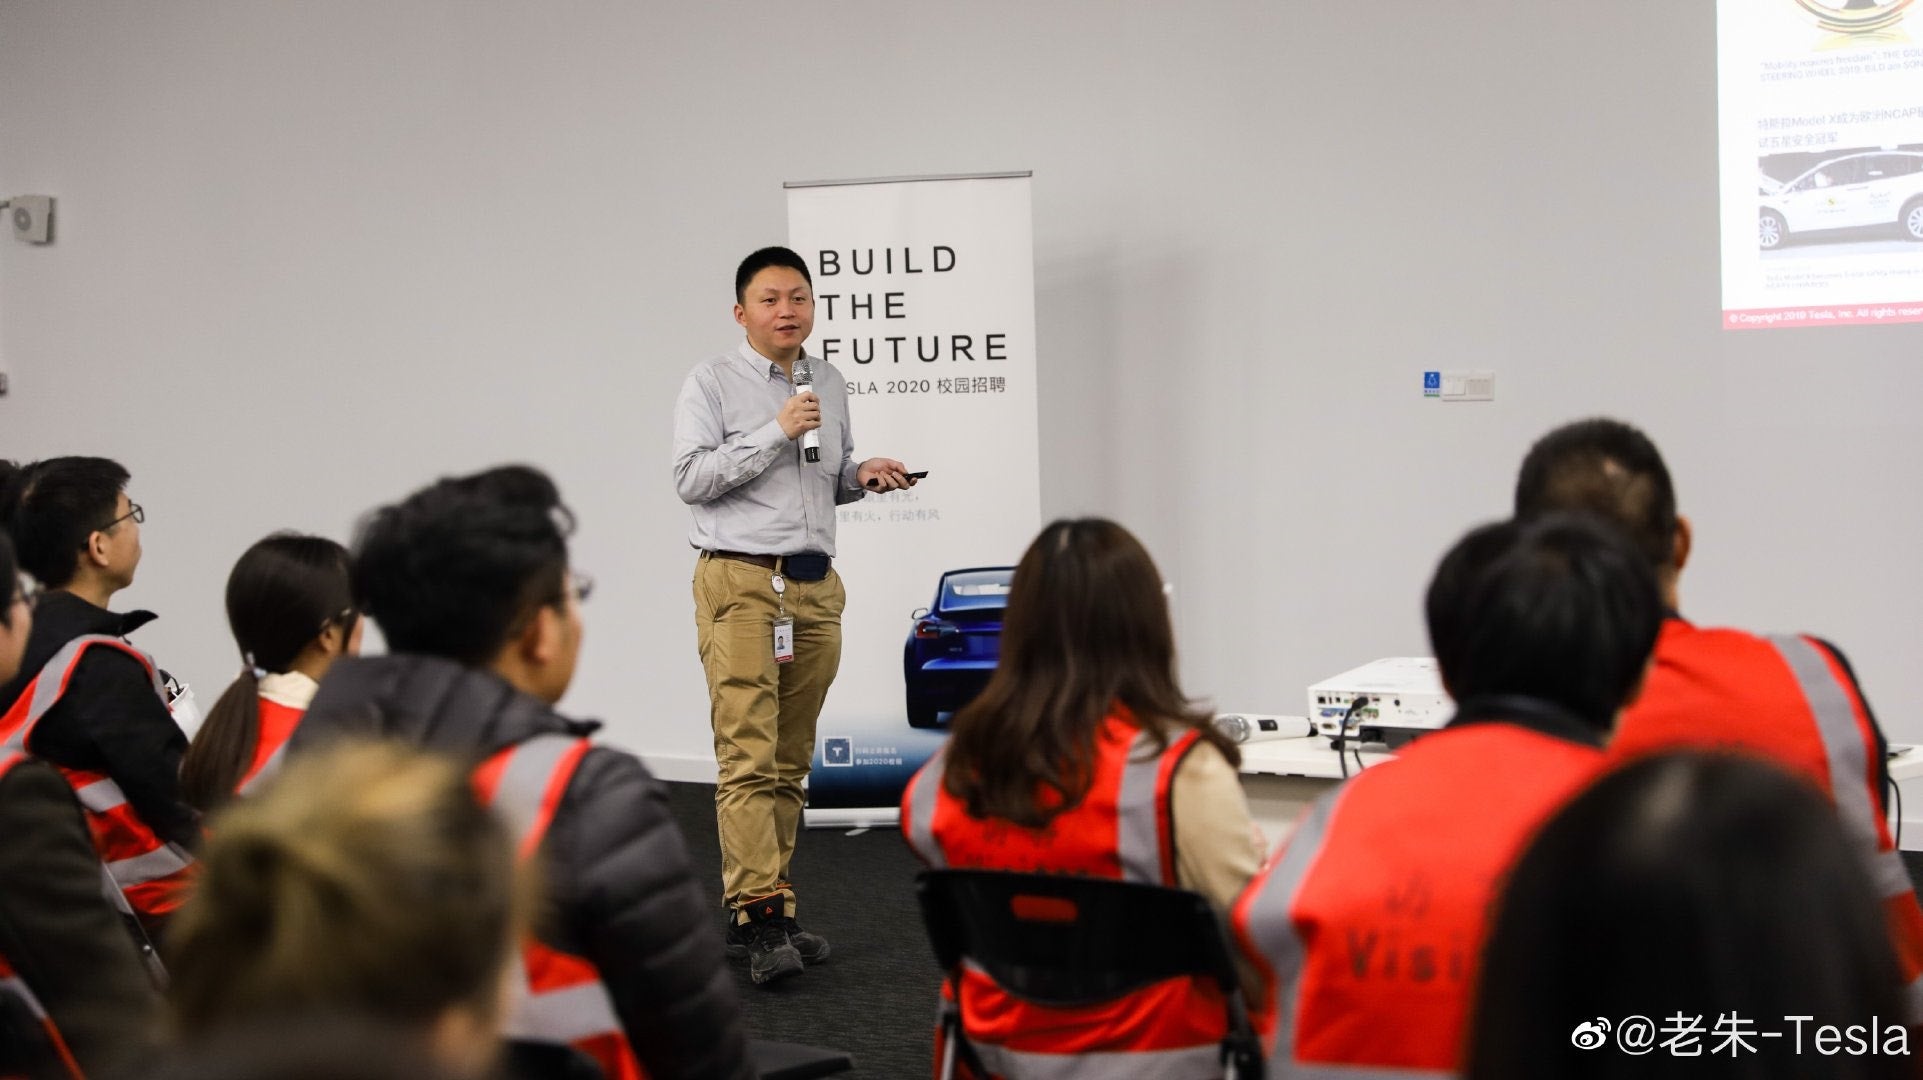 Tesla's Shanghai Gigafactory 3 manufacturing team opens campus recruitment — A brilliant move to prepare massive growth of China market!!